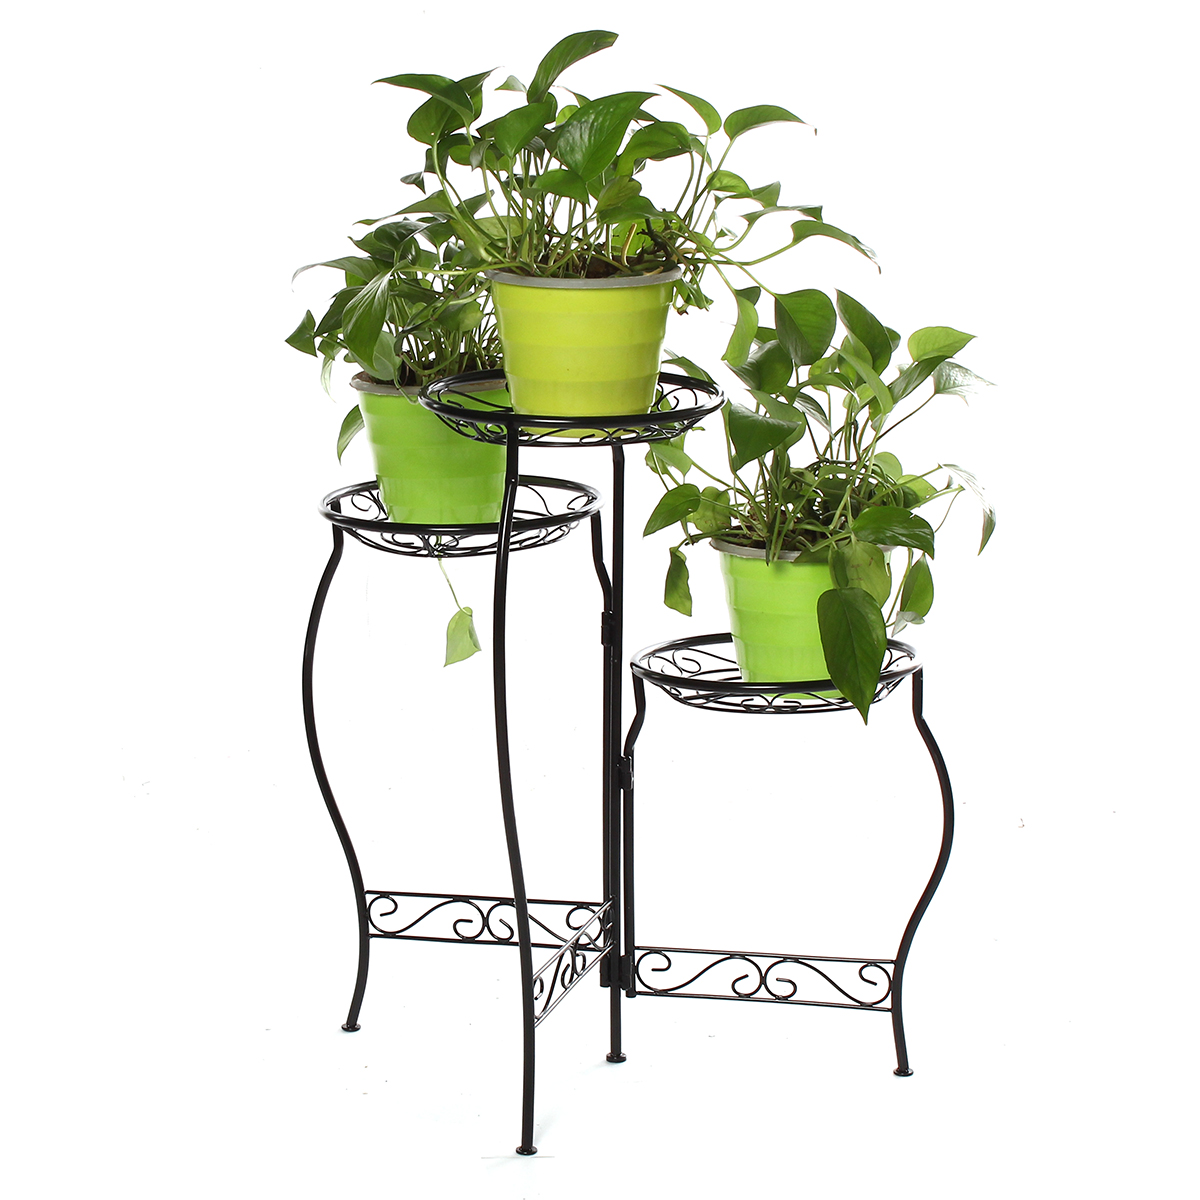 Metal-Flower-Pot-Stand-3-Tiers-Rounded-Plant--Holder-Indoor-Outdoor-Flower-Plant-Stand-Displaying-Ra-1797075-6